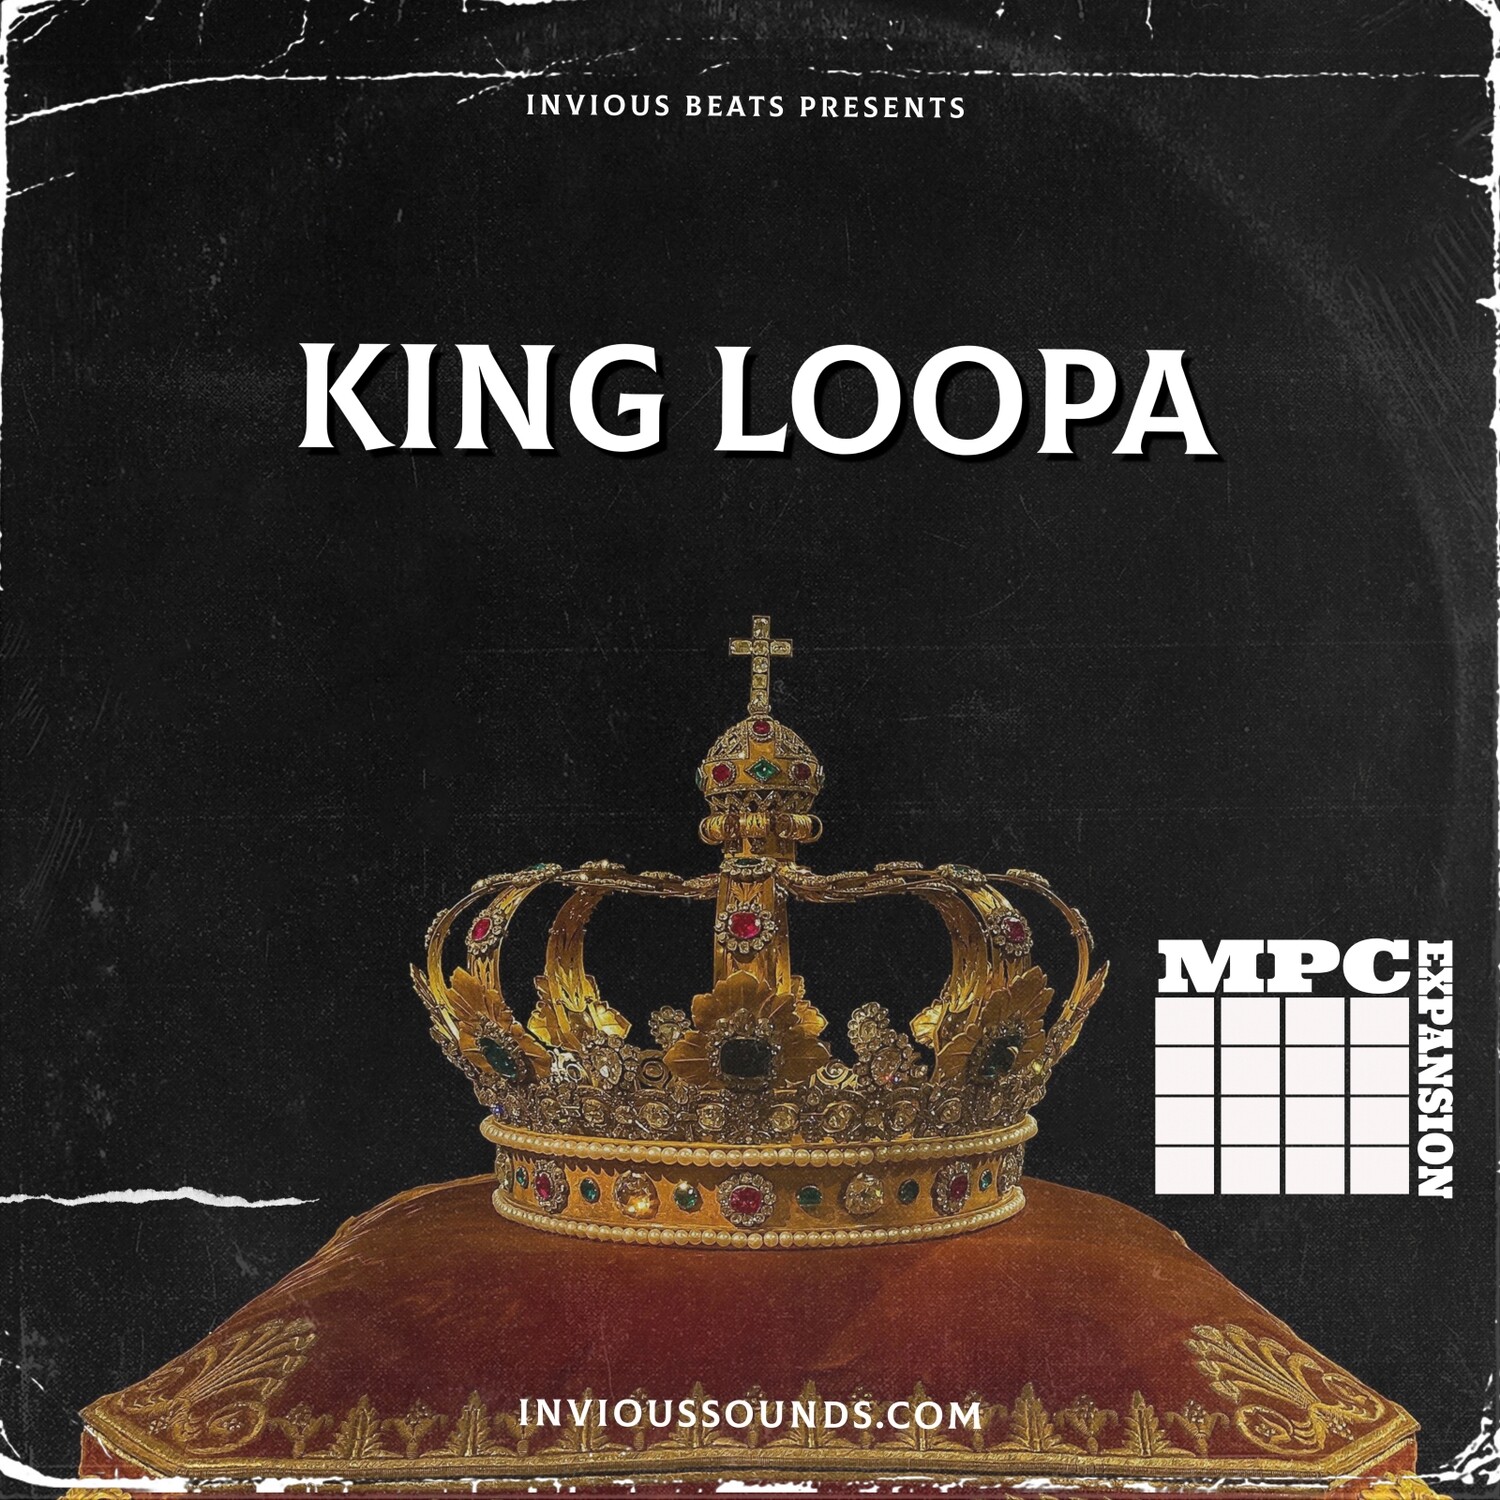 MPC EXPANSION "KING LOOPA" by INVIOUS